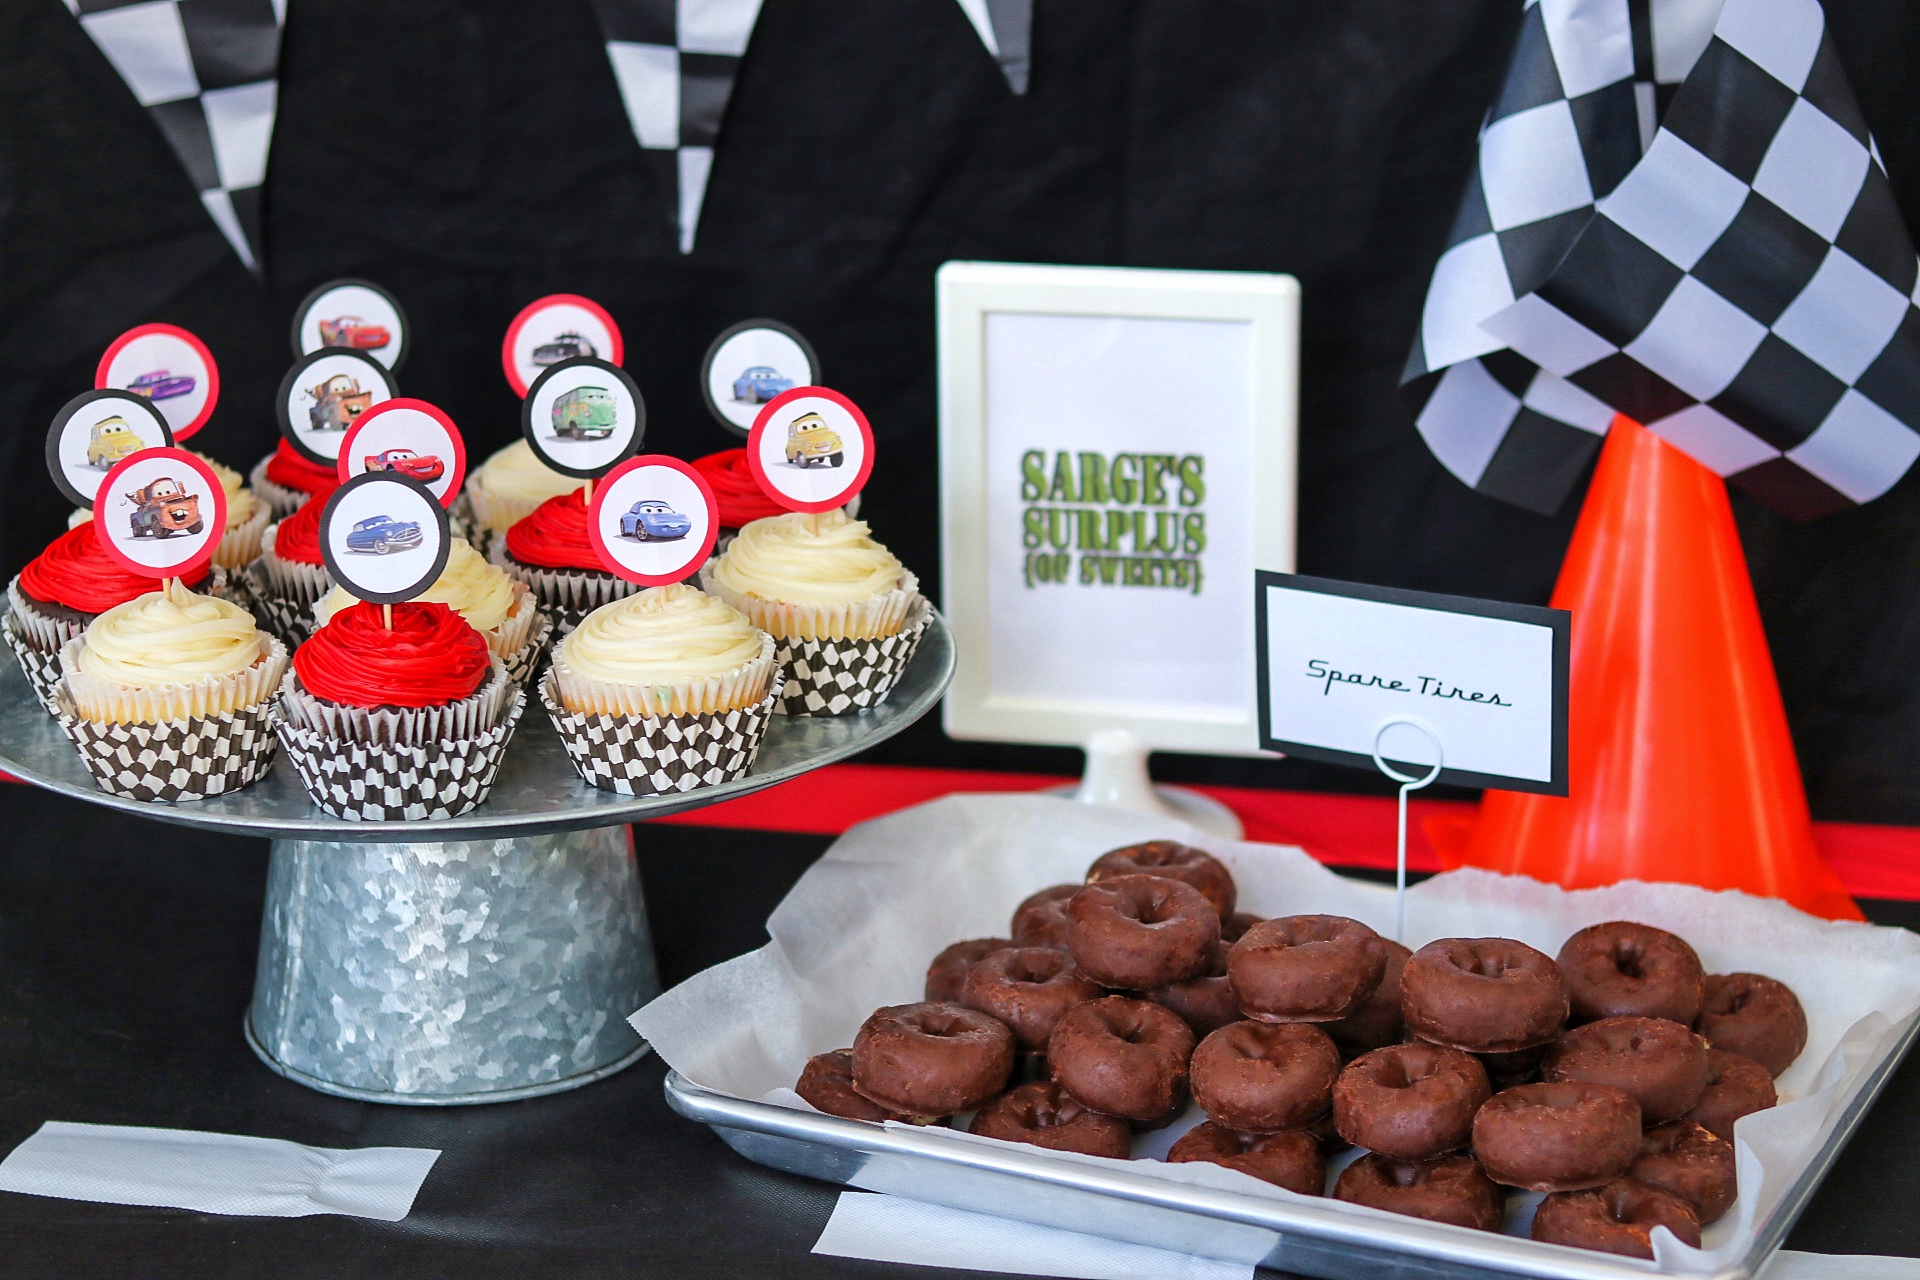 Disney Cars food: Sarge's Surplus of Sweets (cupcakes and Spare Tires)